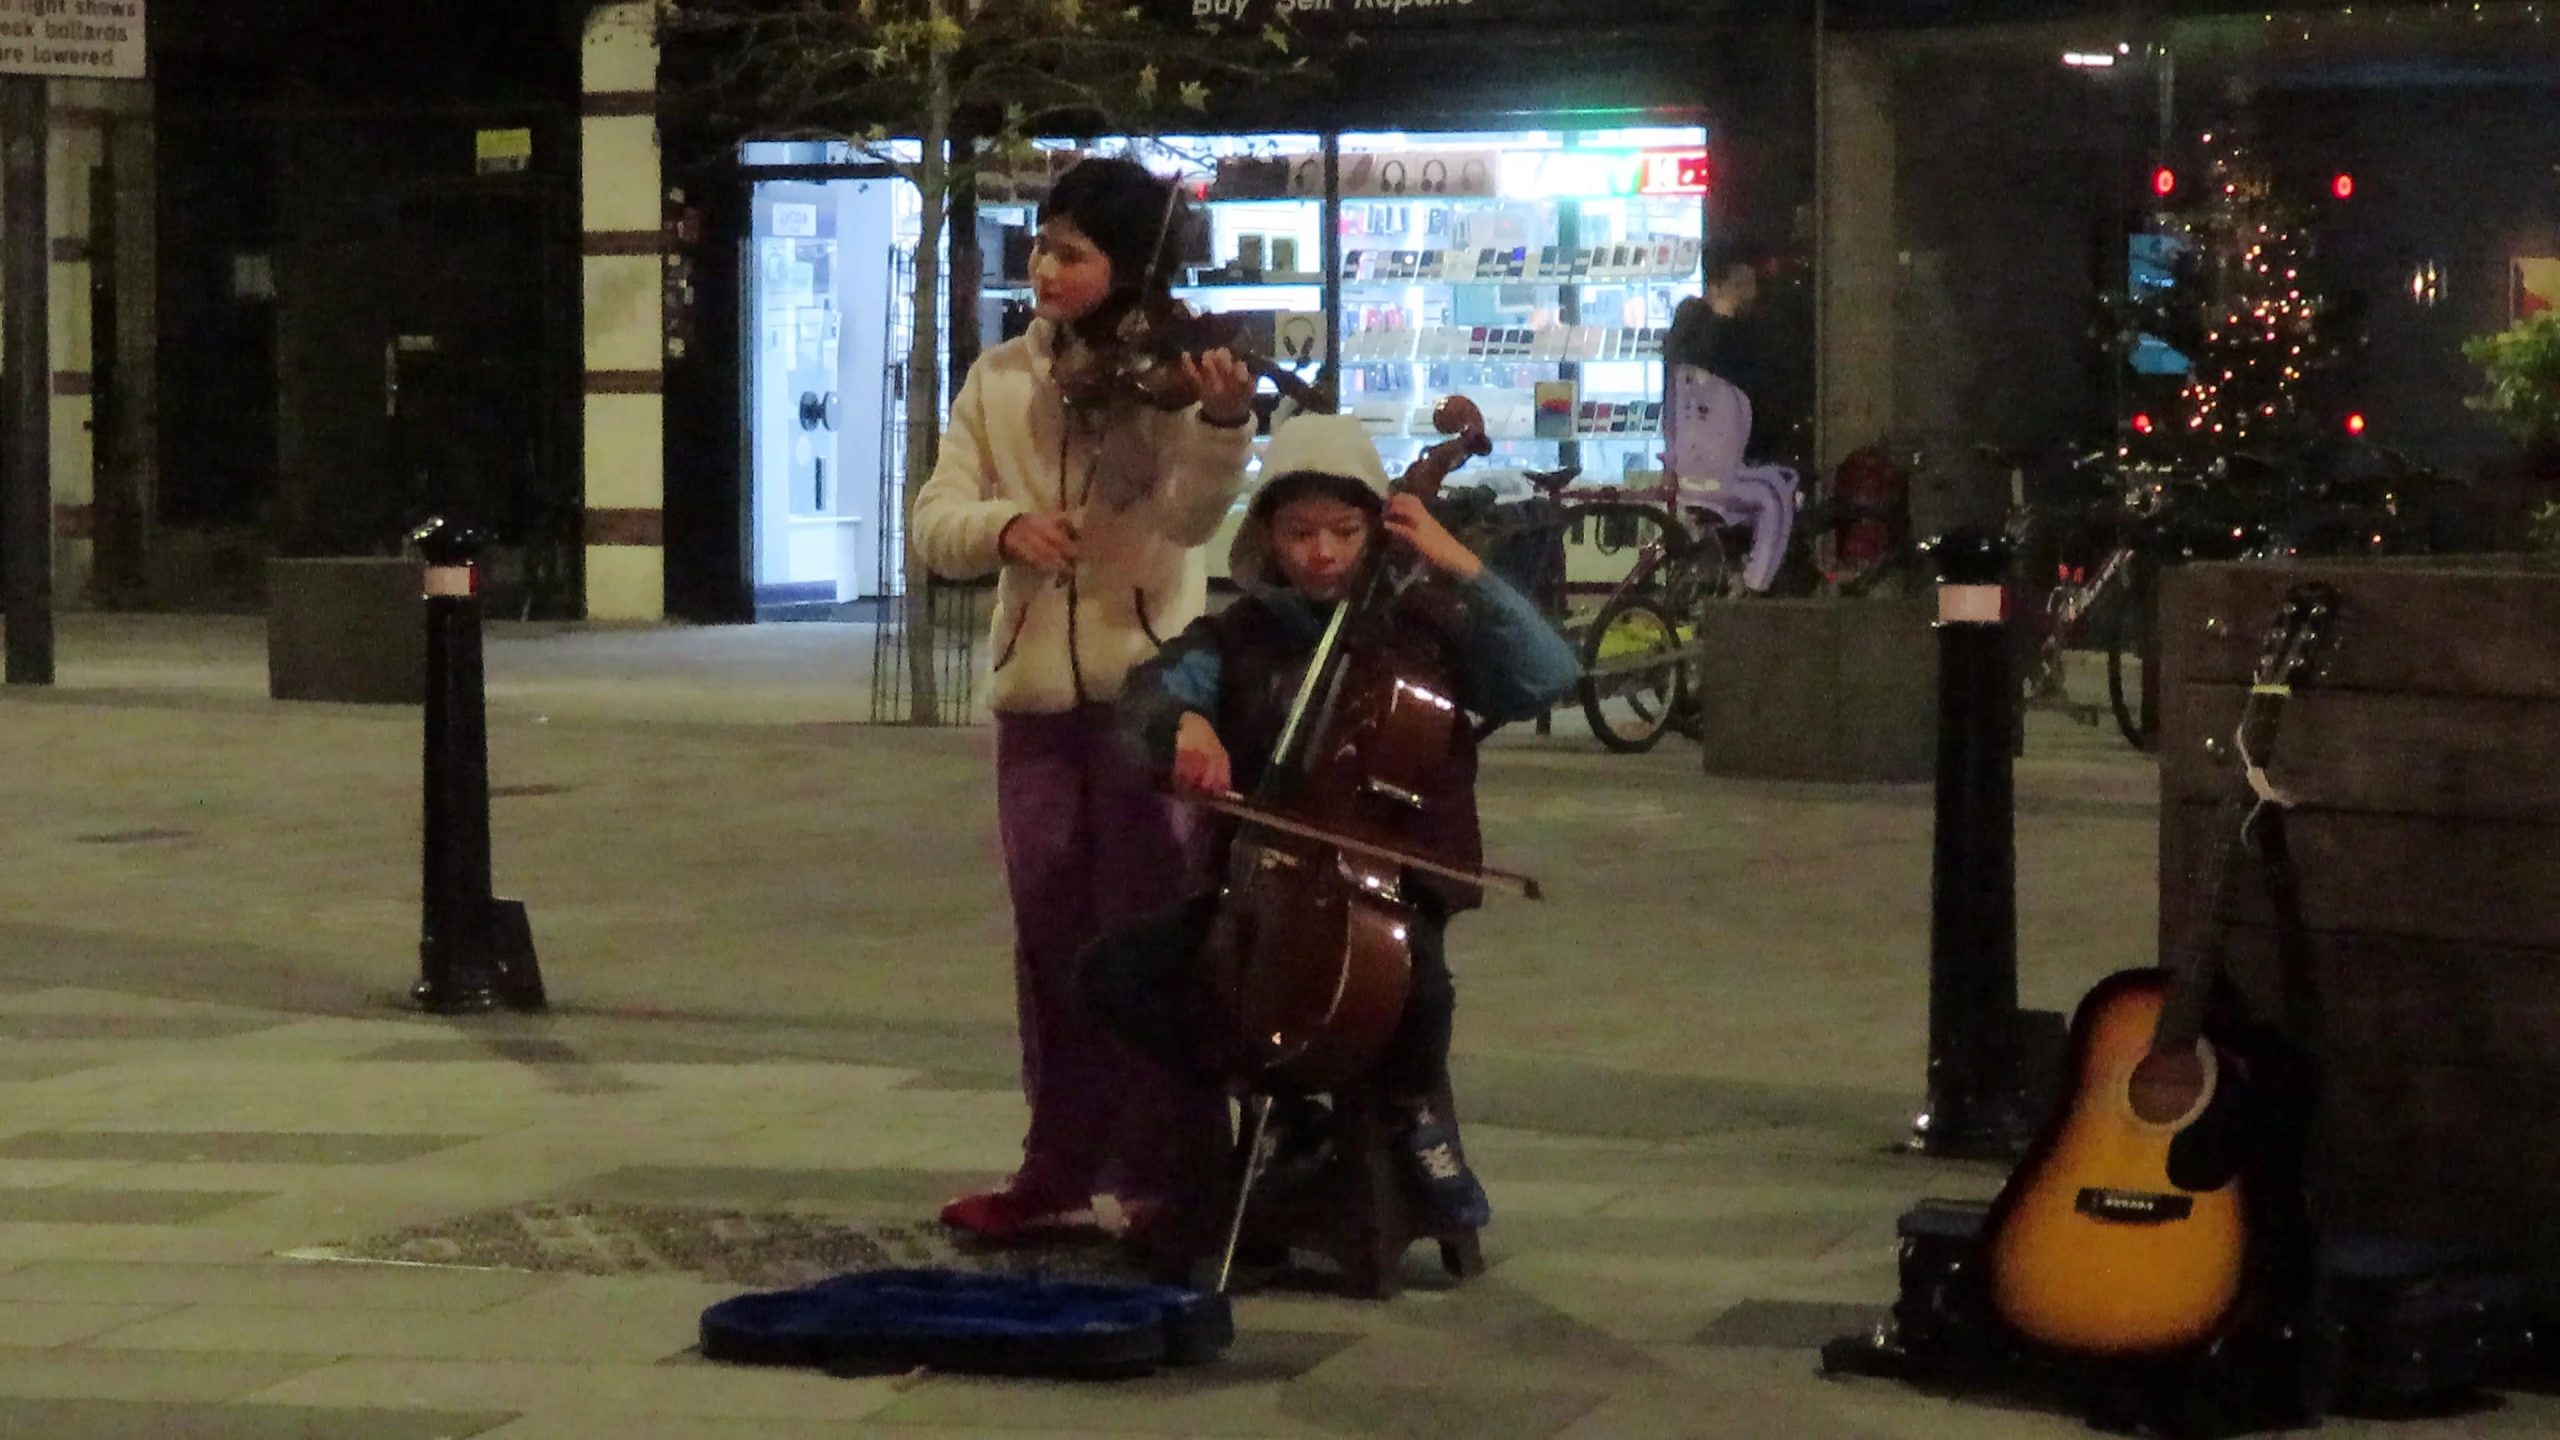 Witness Watford's Youngest Buskers: Cost of Living? Nah, Cost of Dreams! Adorable Buskers Inspire Watford!